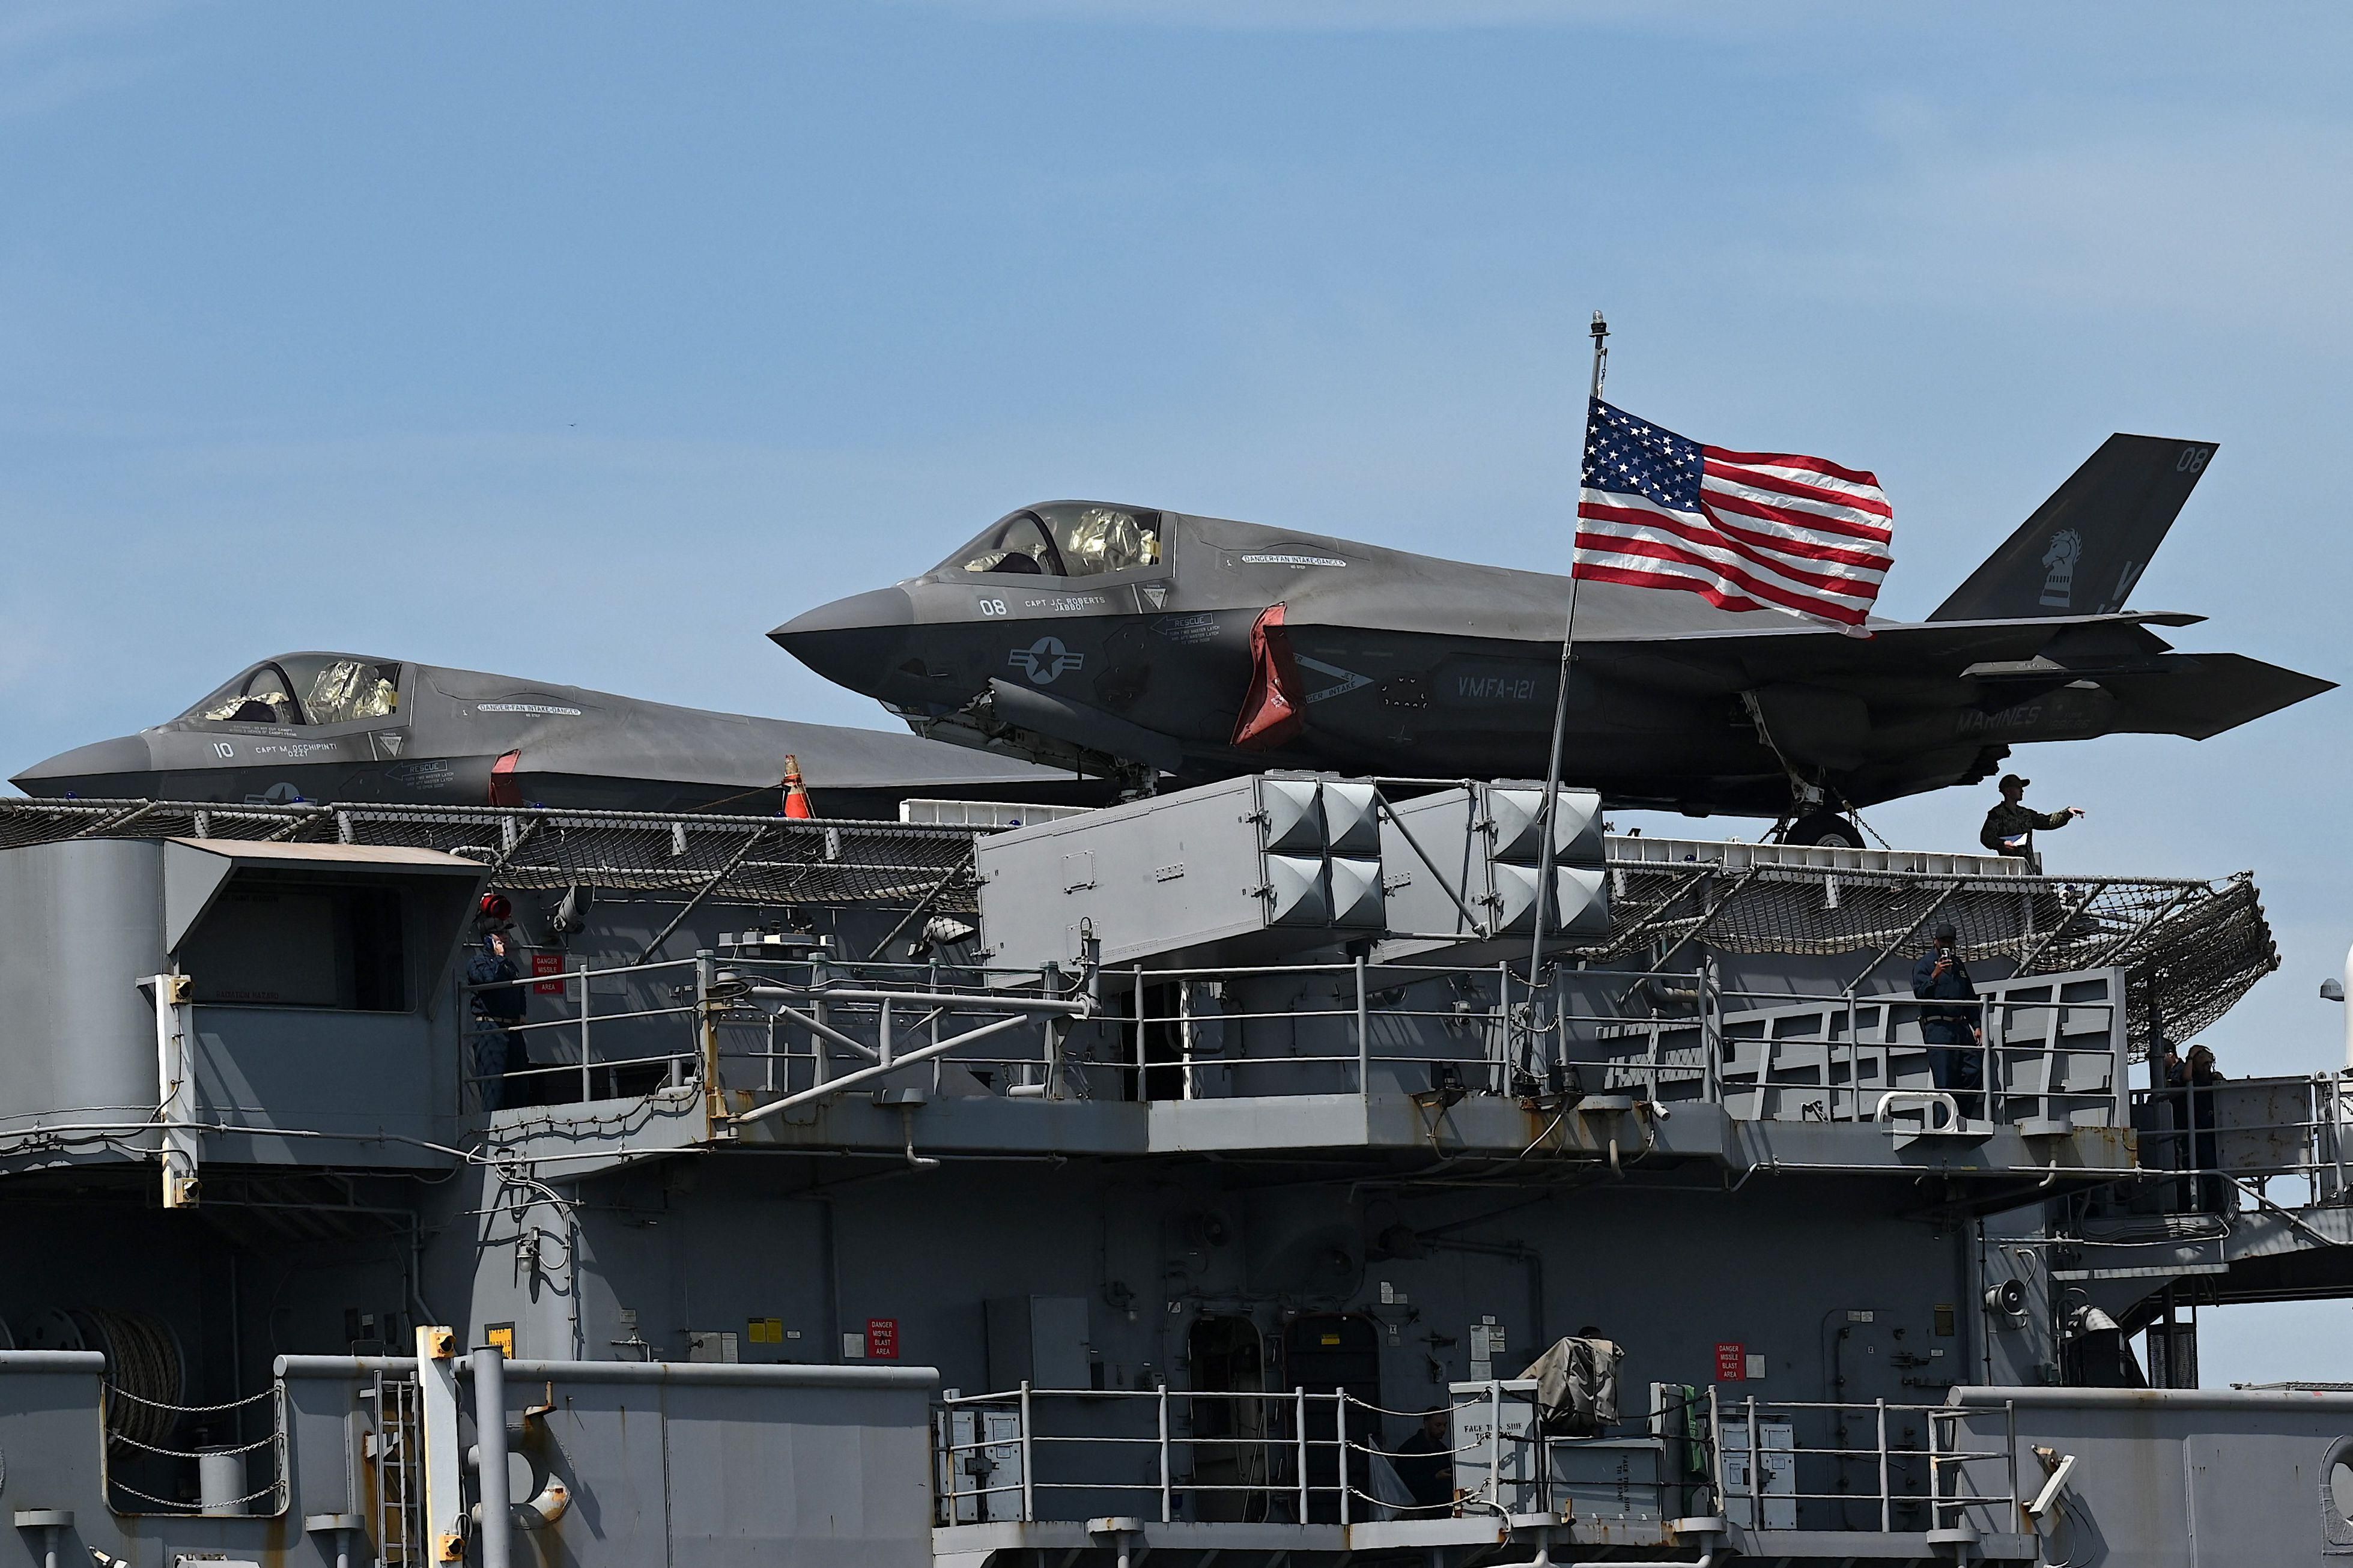 A pair of F-35B Lightning II aircraft are seen on board a U.S. warship in Manila, Philippines on September 27, 2022.